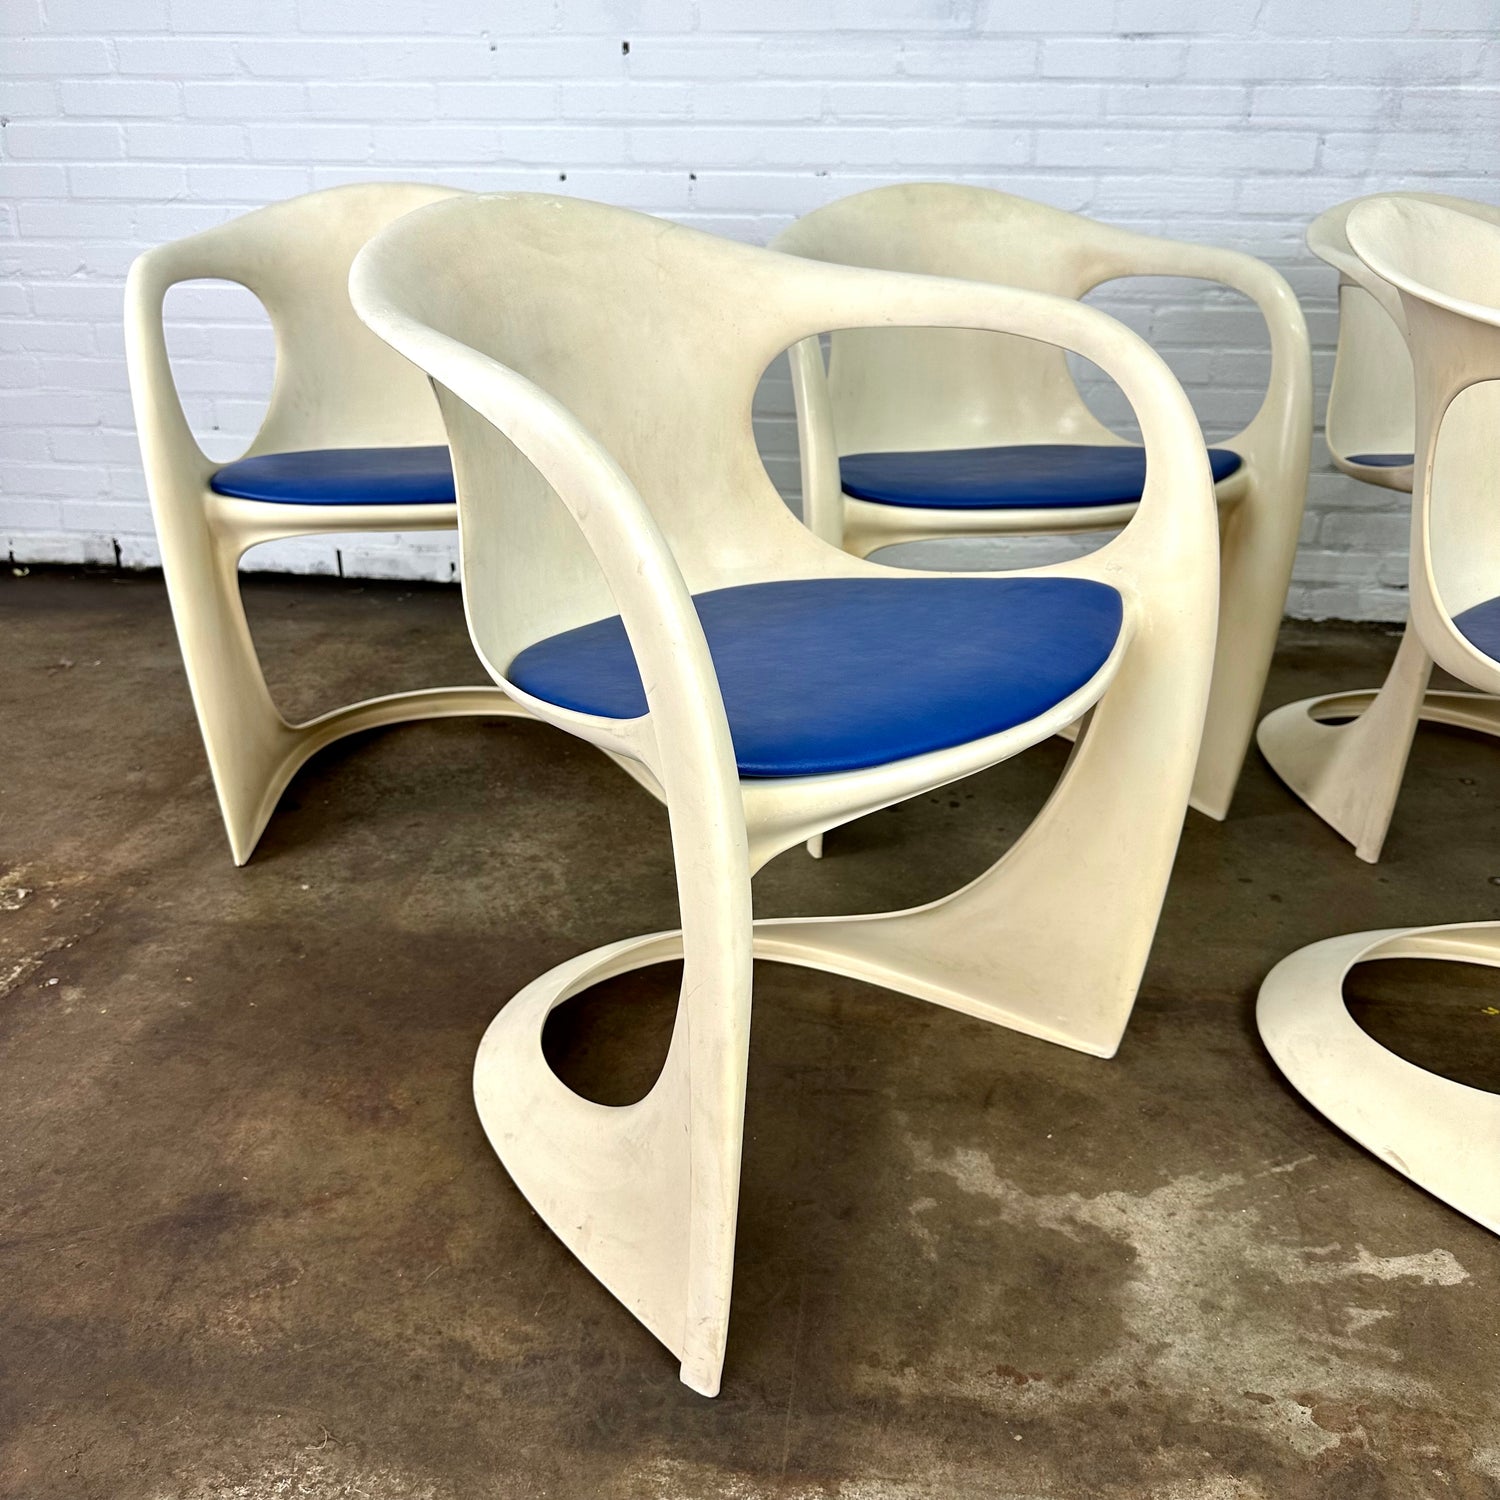 casalino-chairs-creme-colored-by-casala-set-of-5